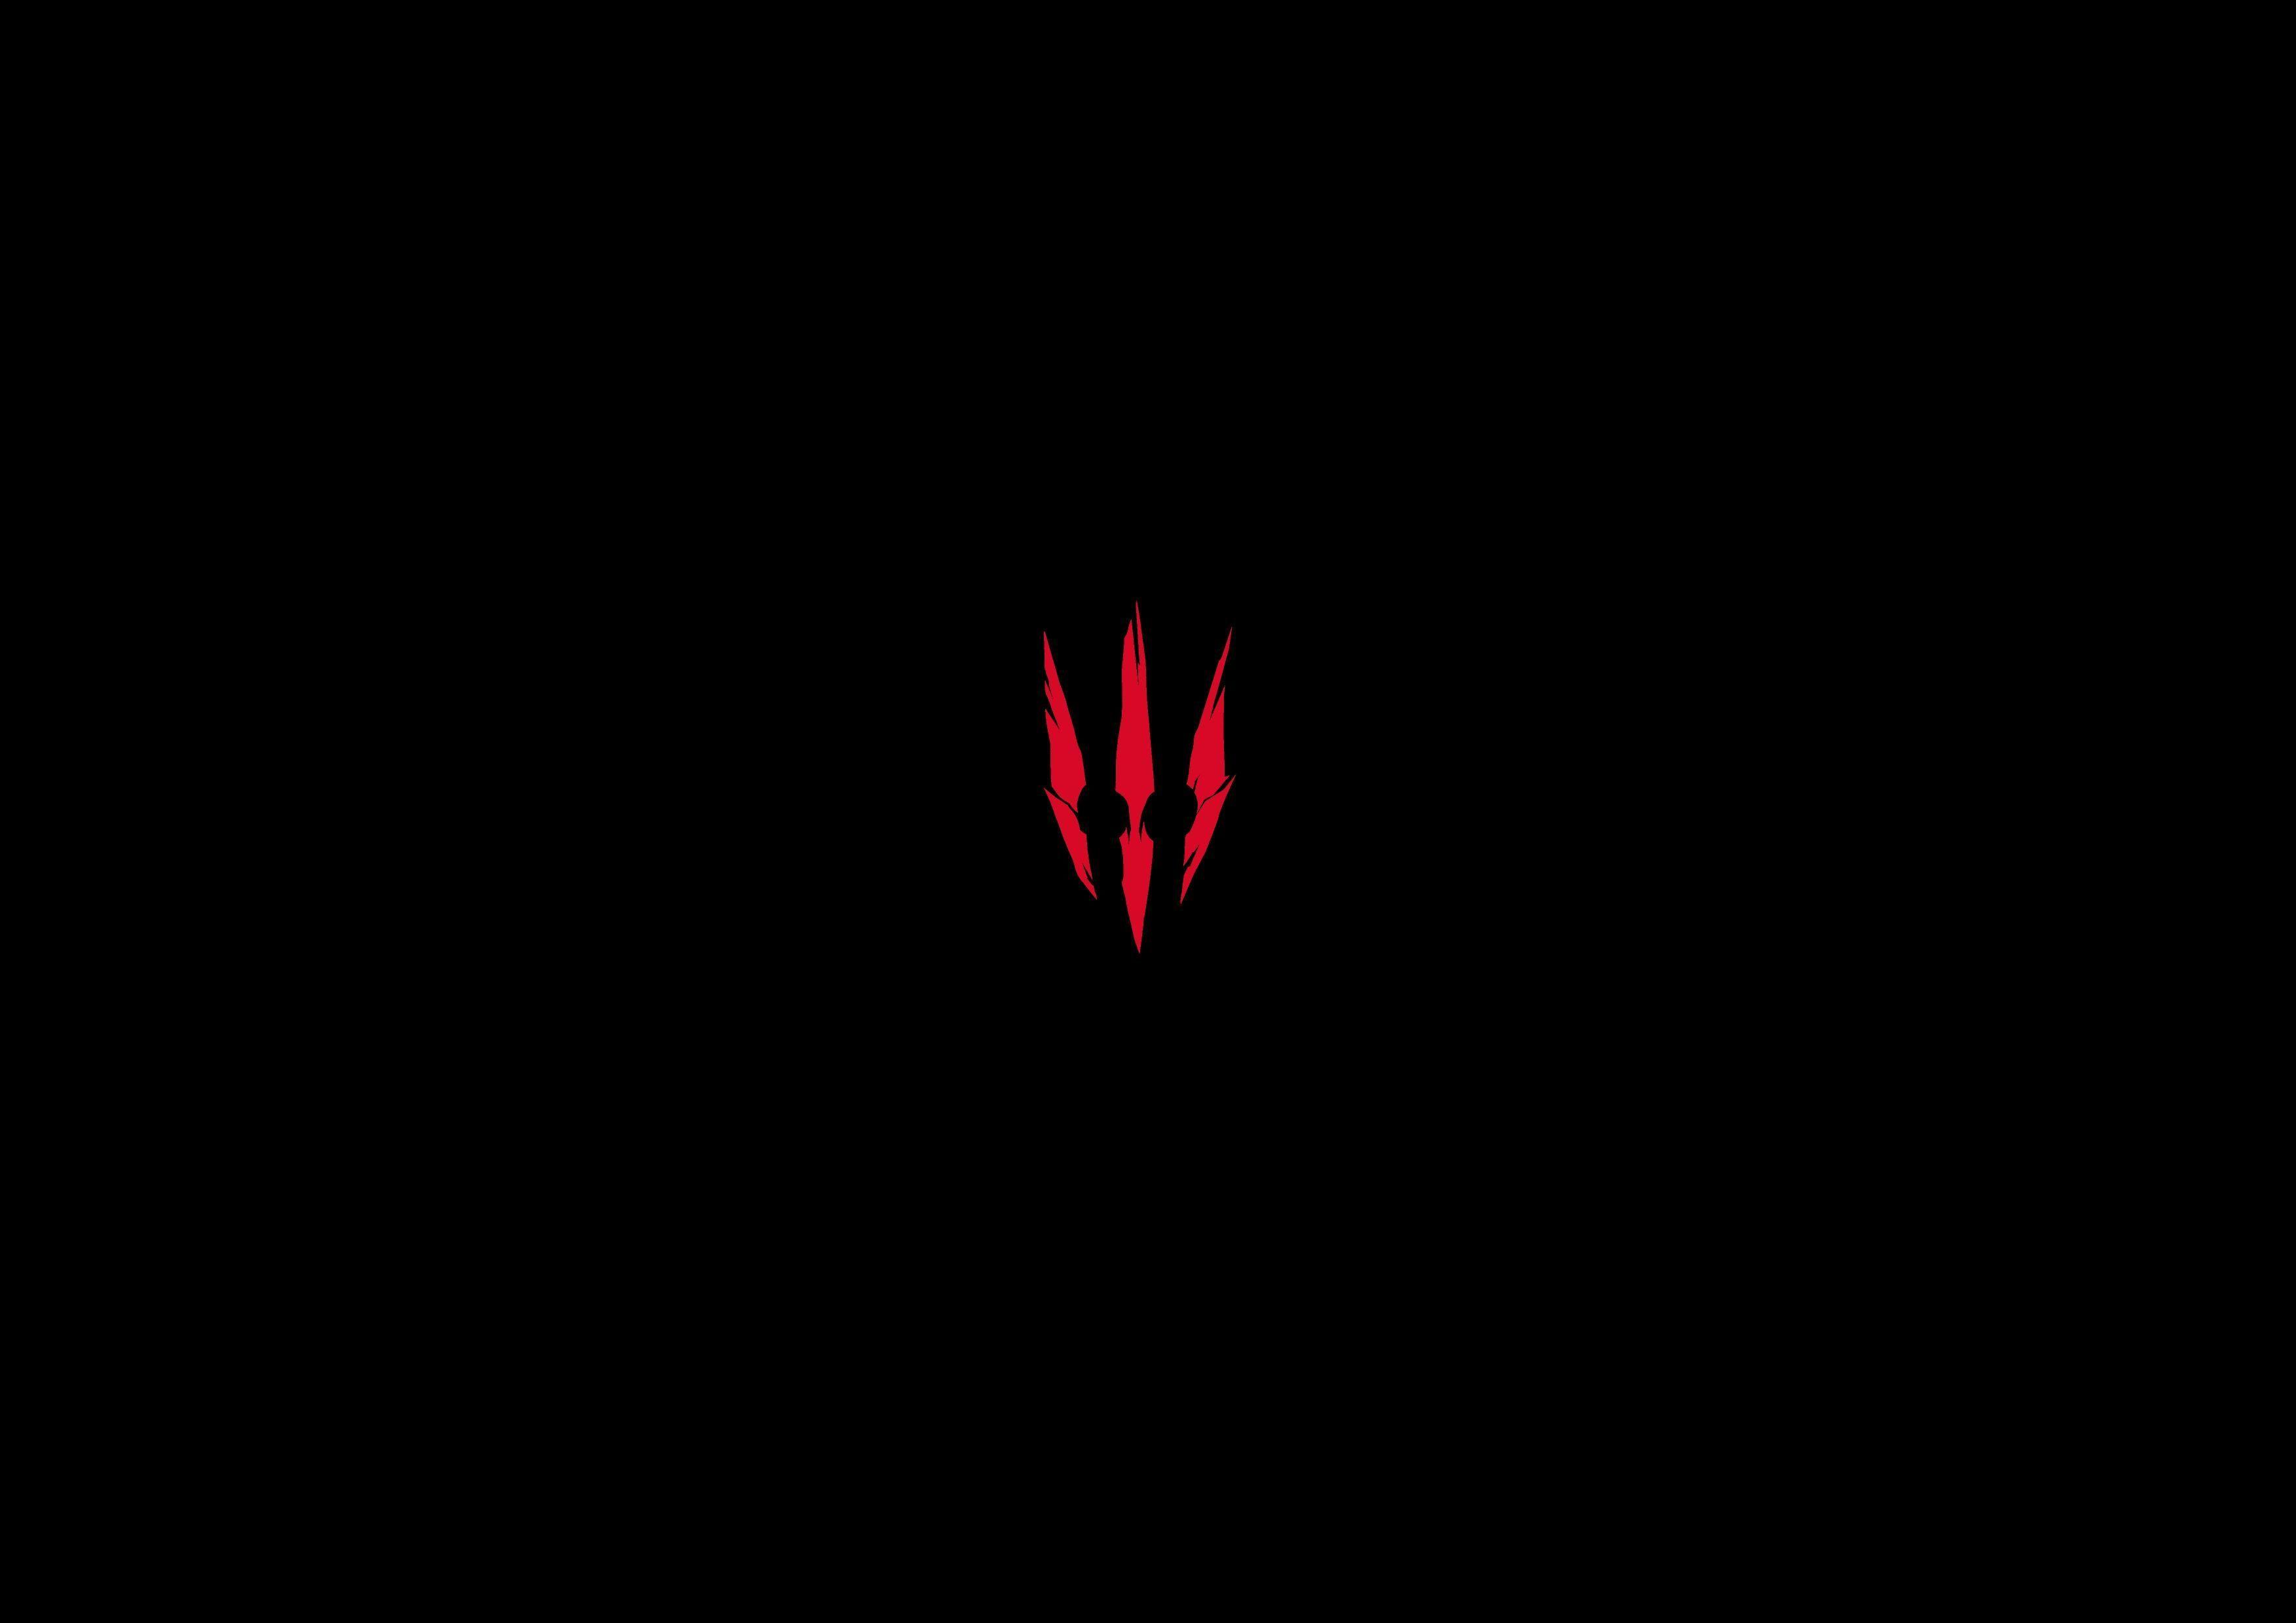 Witcher Logo - The witcher 3 logo wallpaper. Witcher. The witcher The Witcher